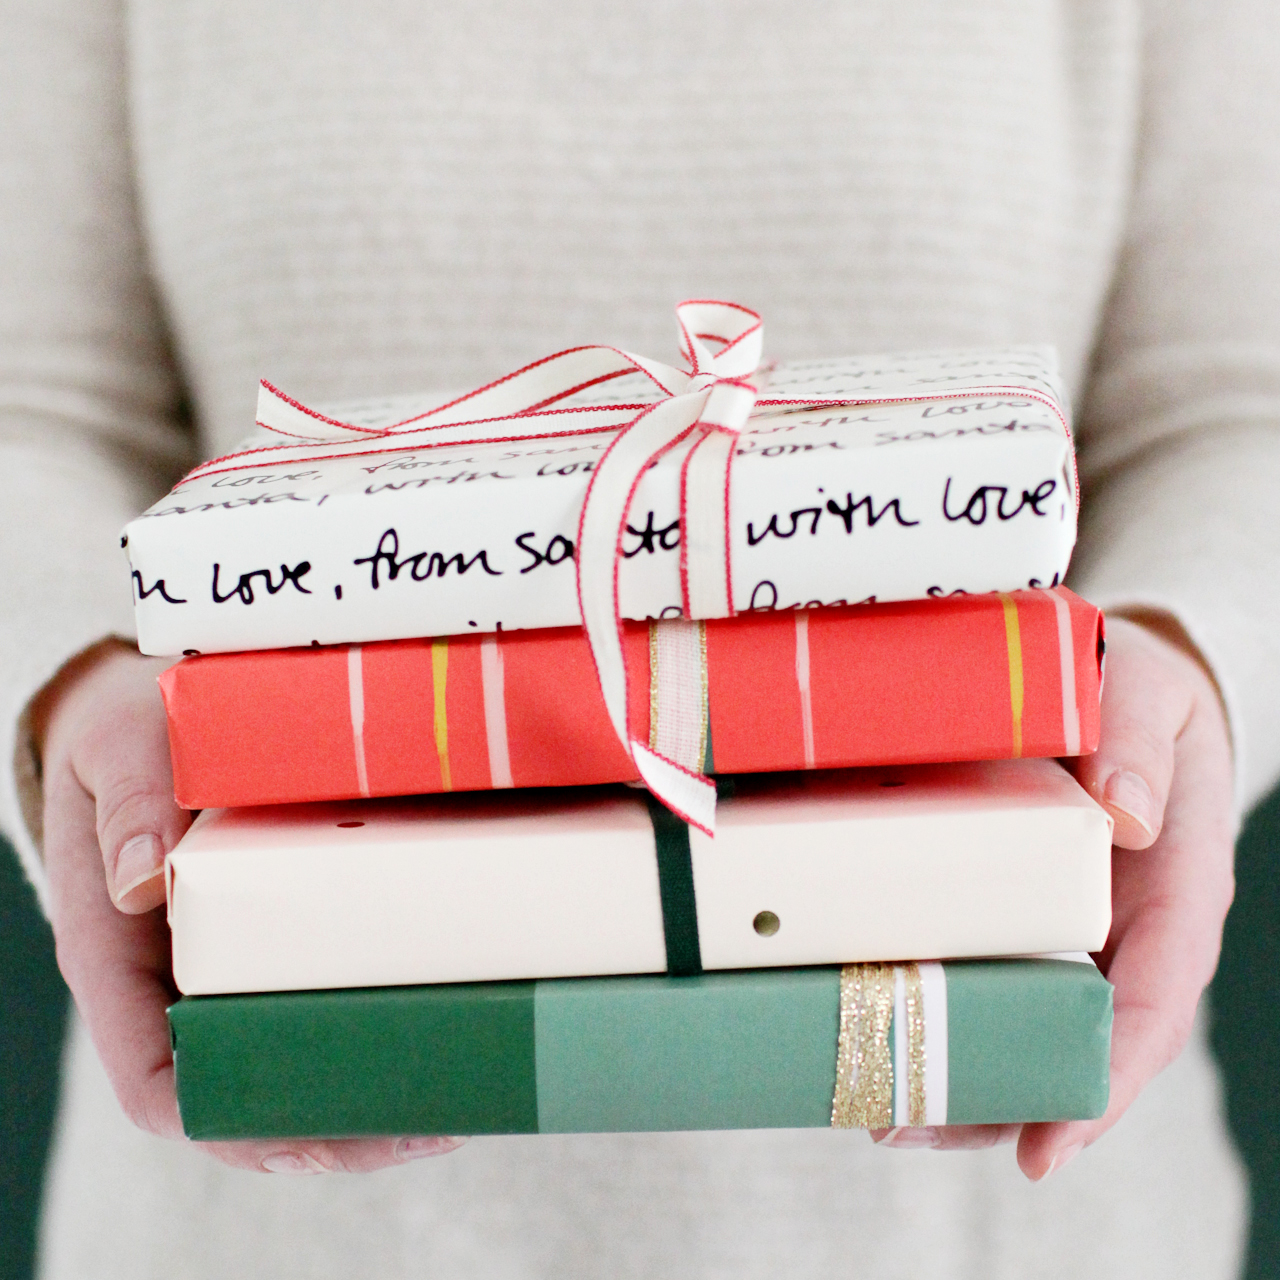 Green and Neutral Holiday Gift Wrap Inspiration